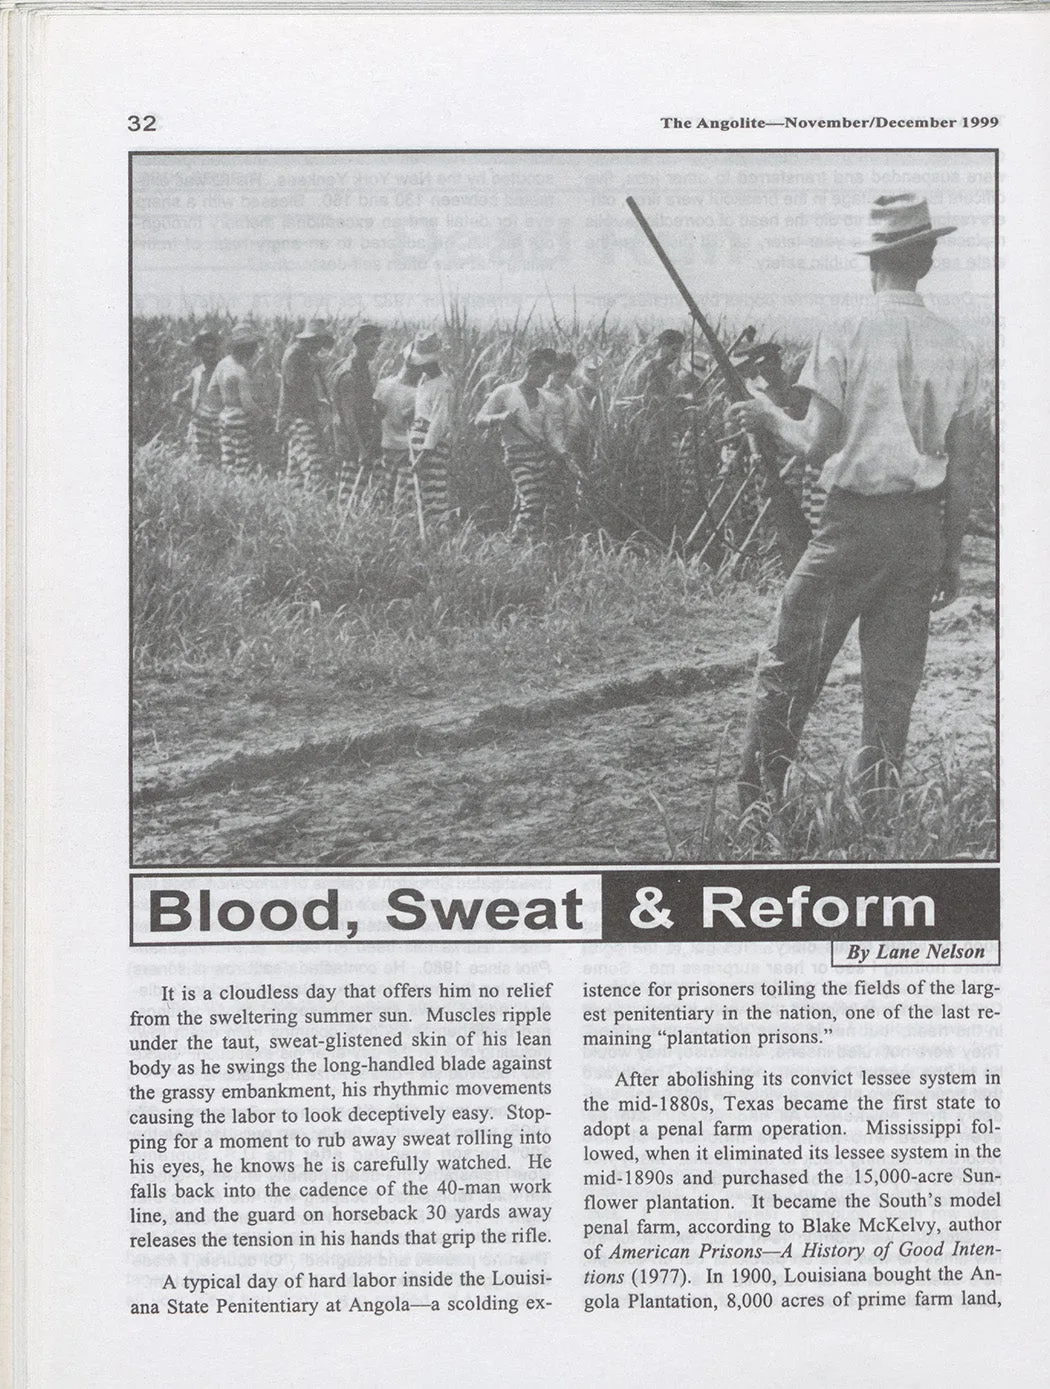 A page from The Angolite that features a photograph of a prison guard holding a shotgun while watching prisoners work in a field. The title of the article on the page is 